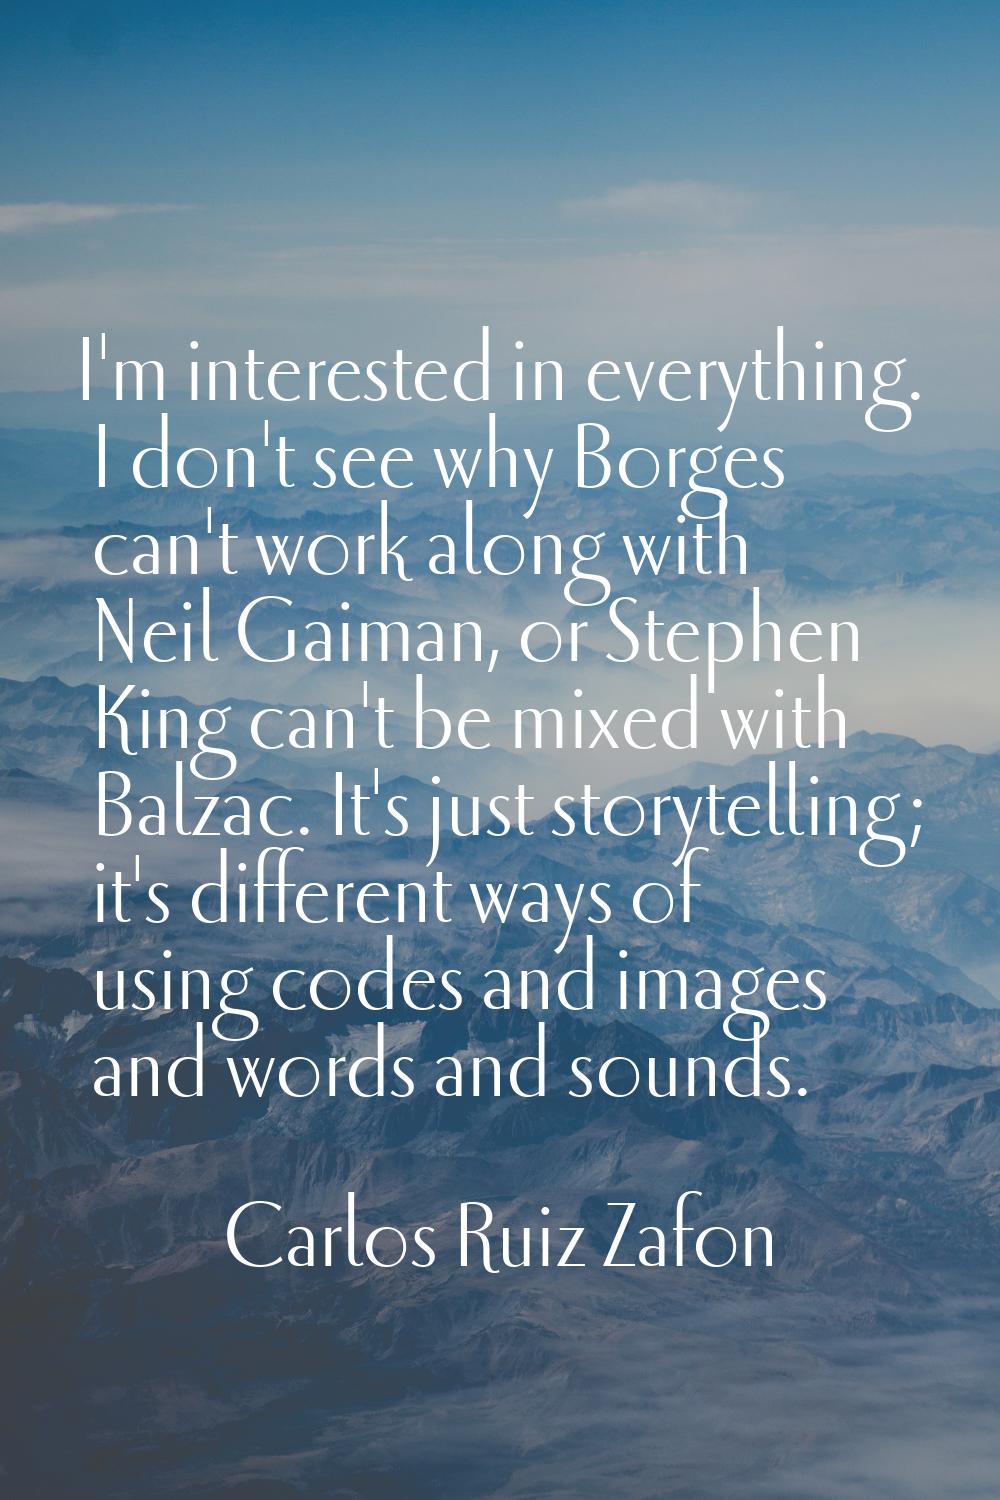 I'm interested in everything. I don't see why Borges can't work along with Neil Gaiman, or Stephen 